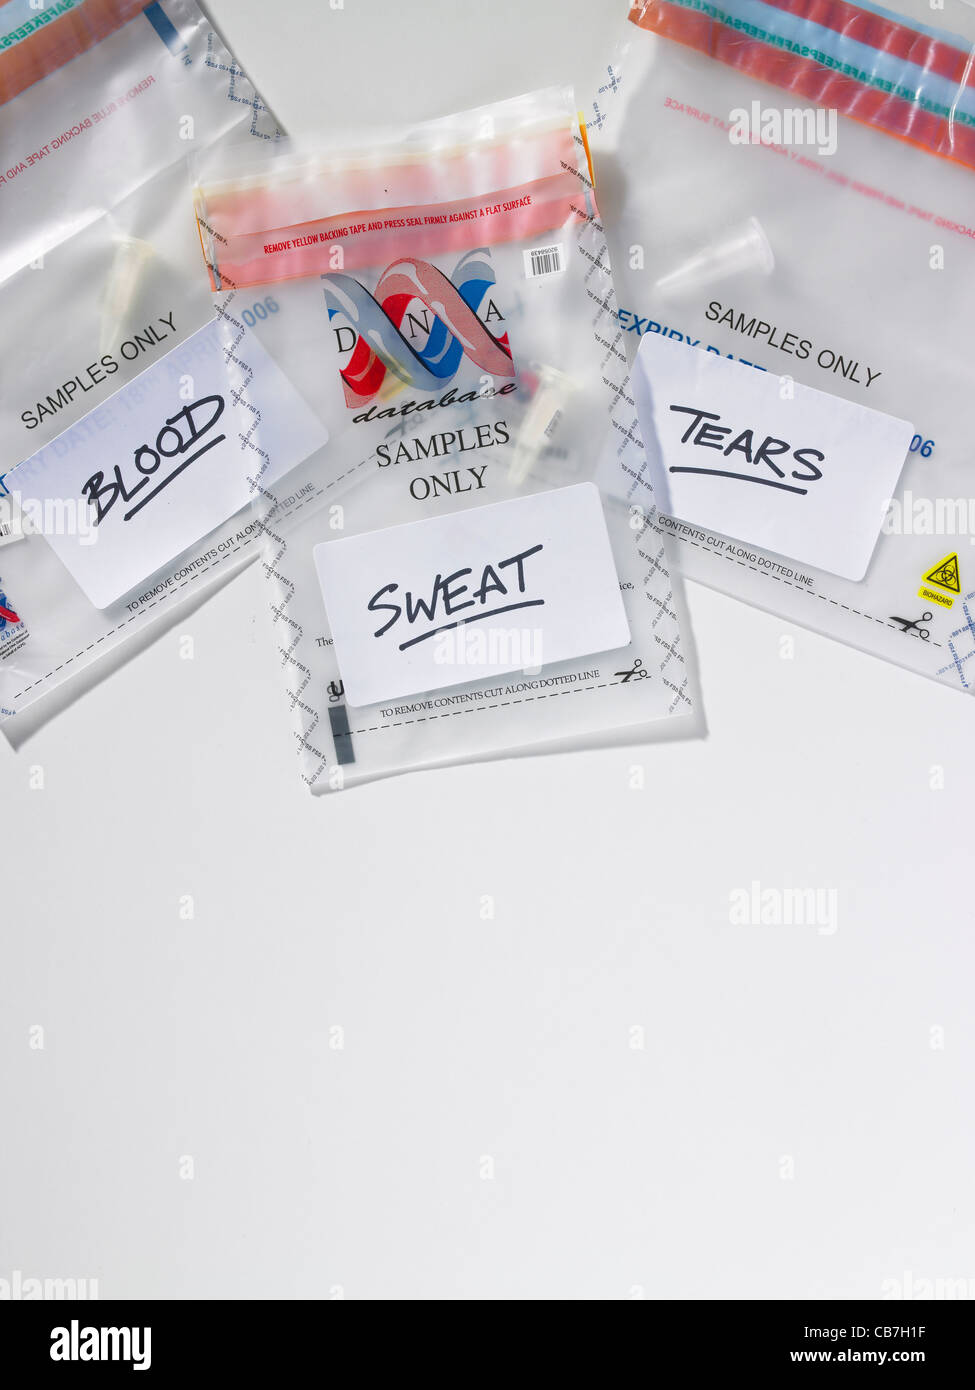 3 DNA Evidence Bags labeled blood, sweat, and tears Stock Photo - Alamy